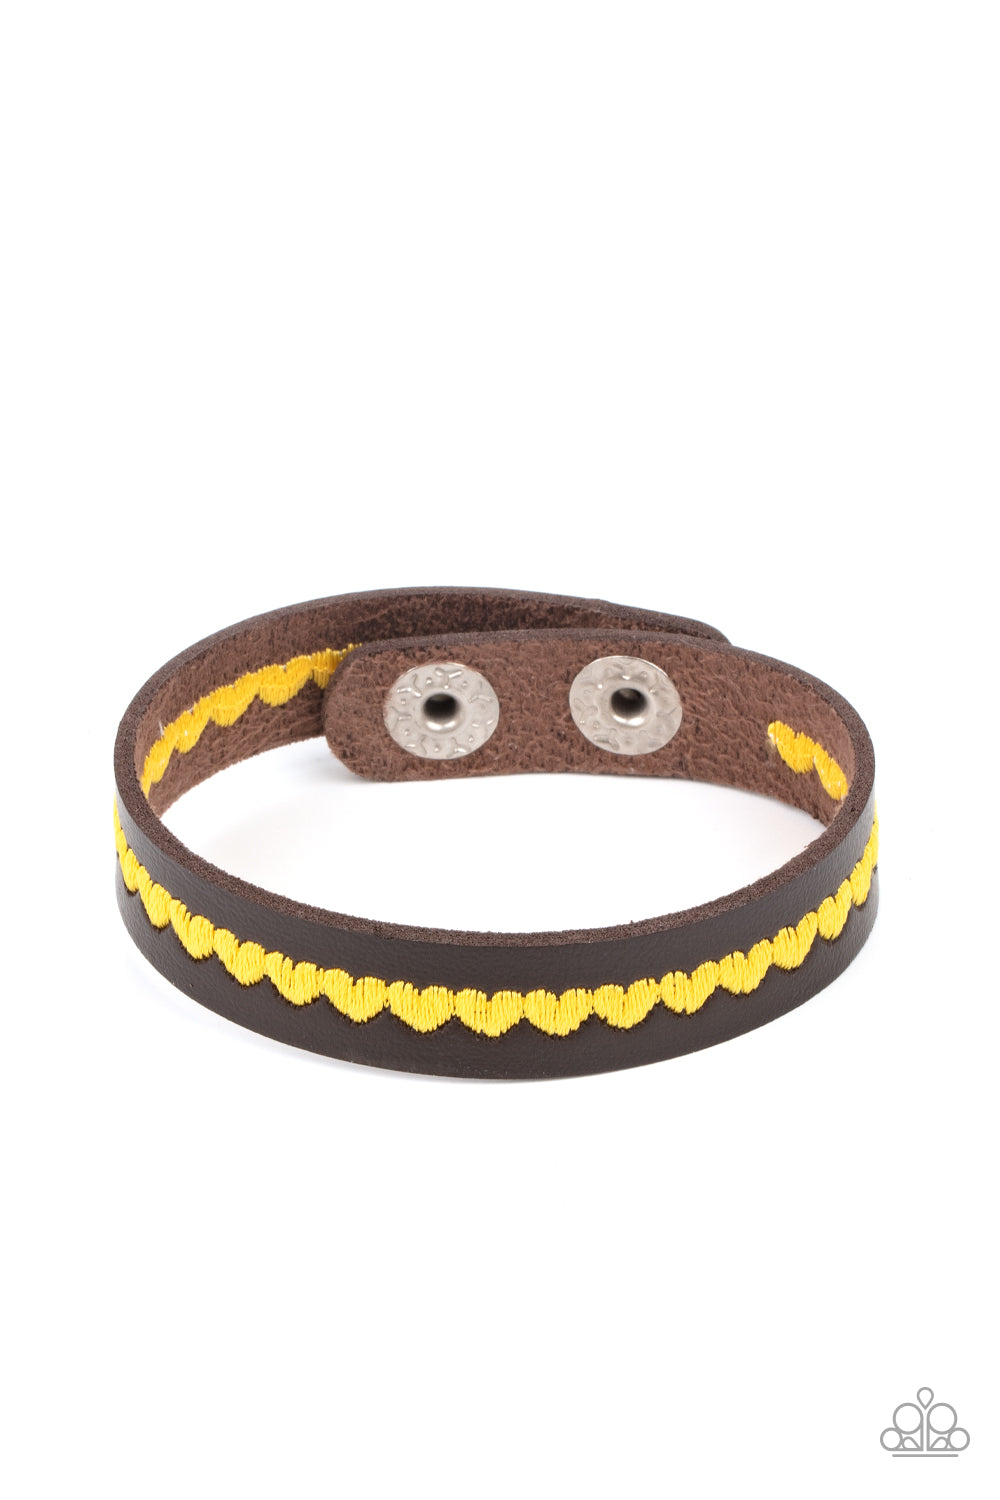 Made With Love - Yellow Bracelet